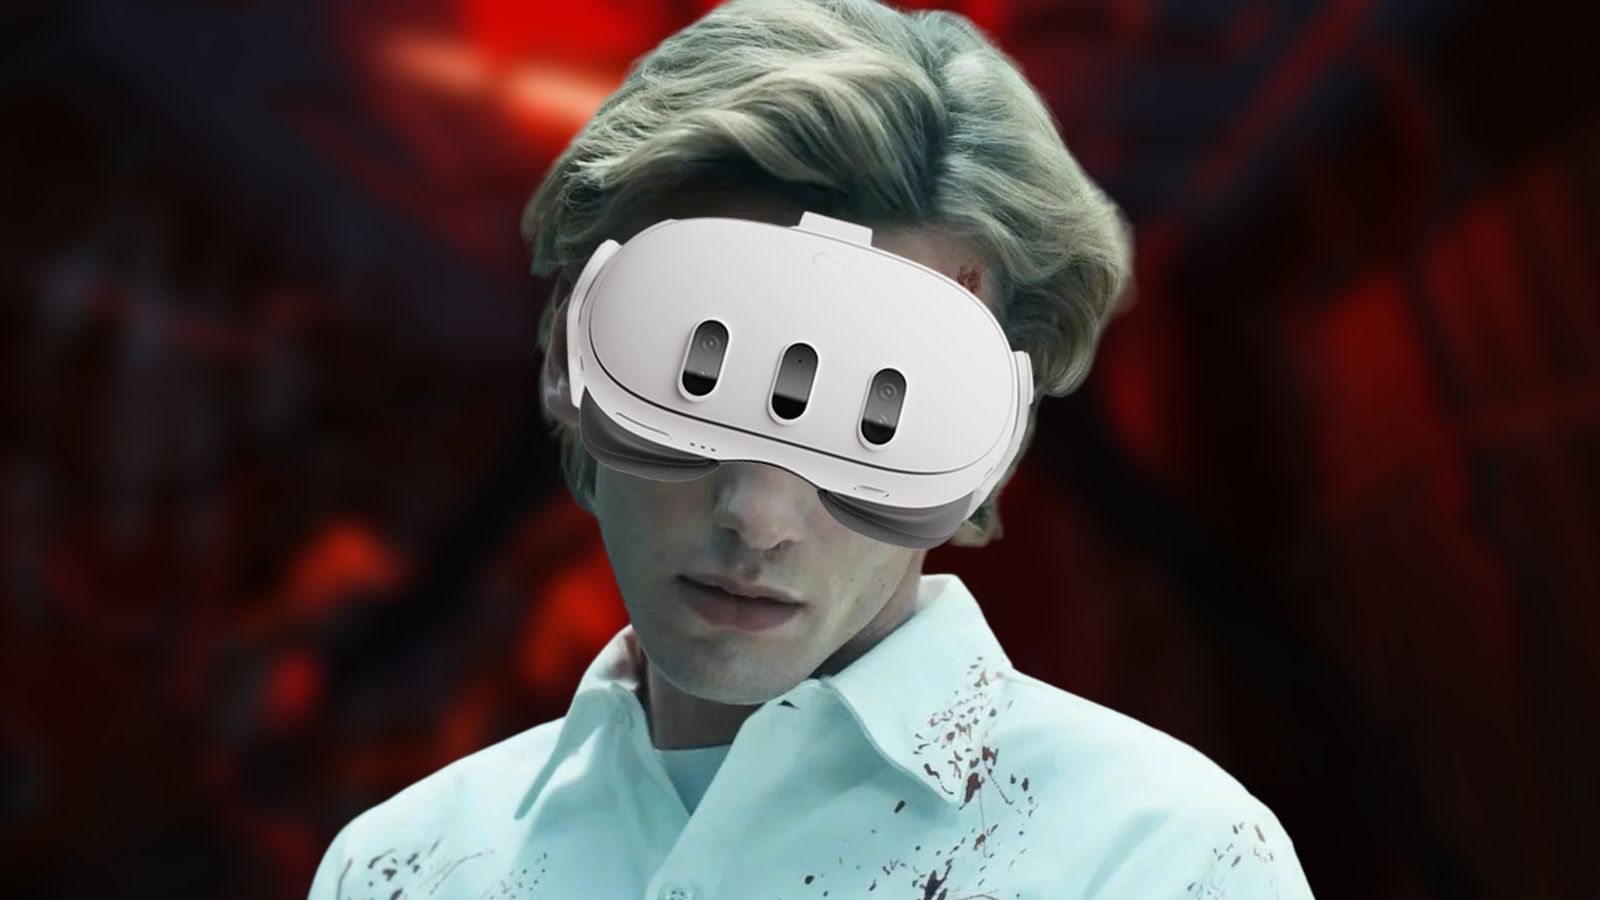 Henry Creel in Stranger Things wearing a Meta Quest 3 headset